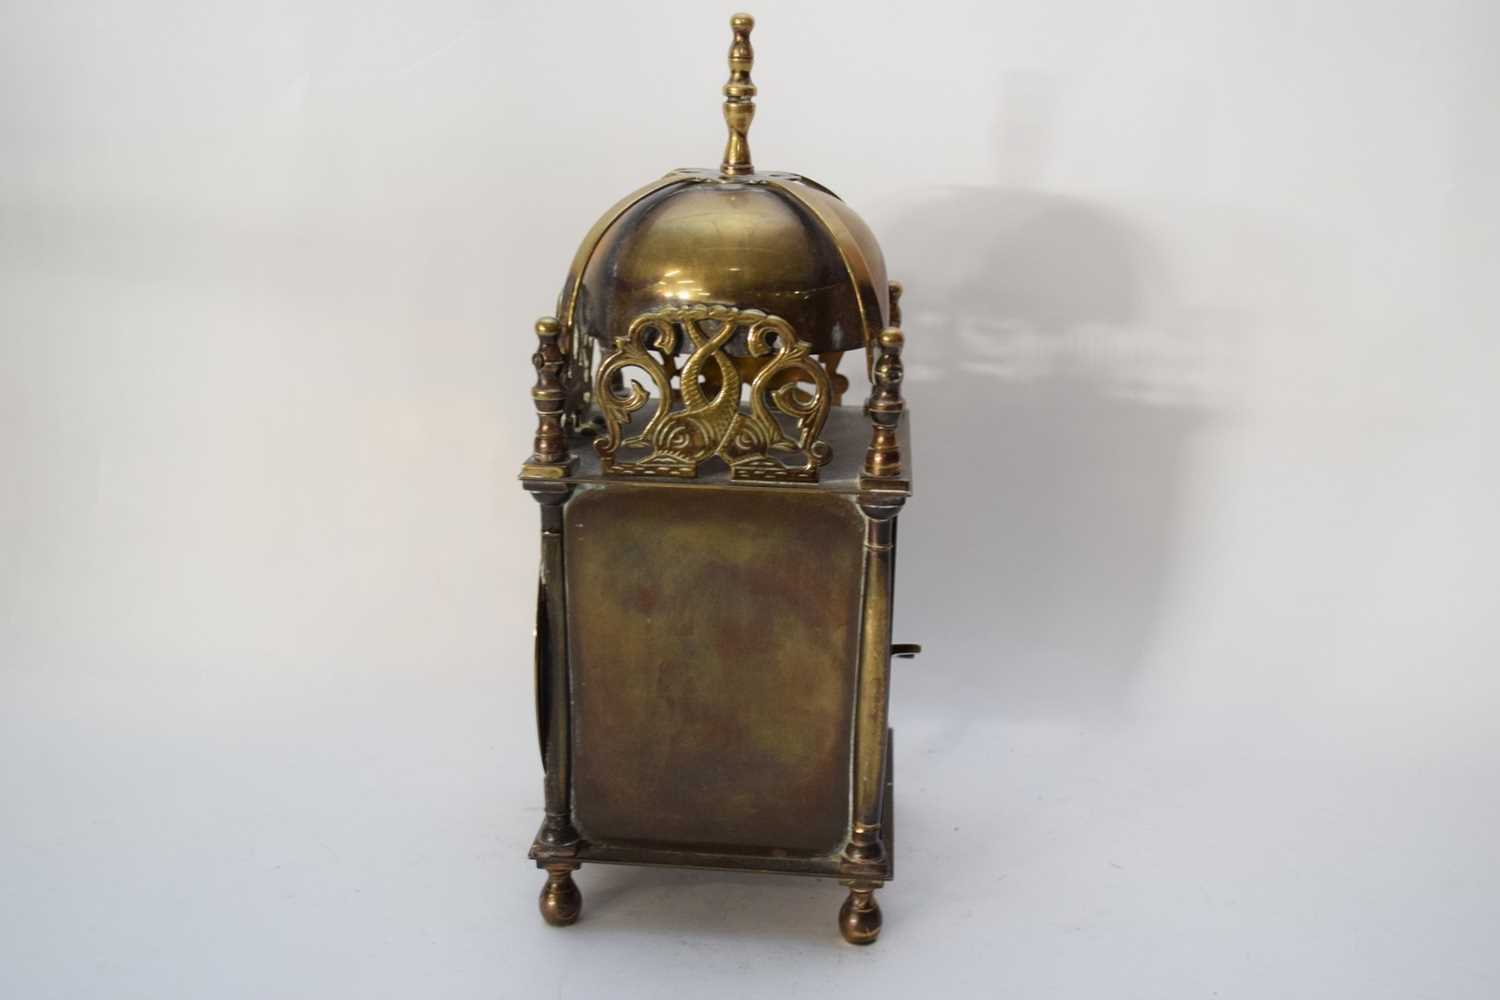 Lantern clock made by Smiths - Image 3 of 6